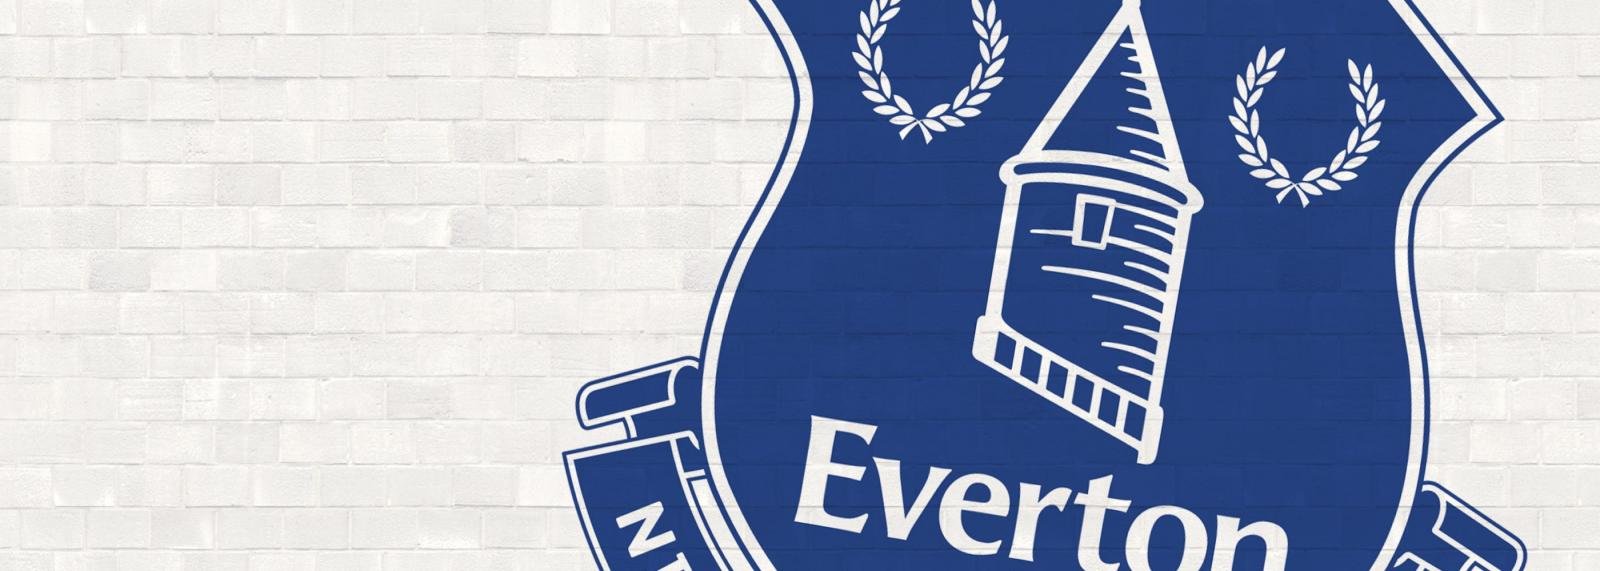 Why Roberto Martinez’s position as Everton manager is now untenable